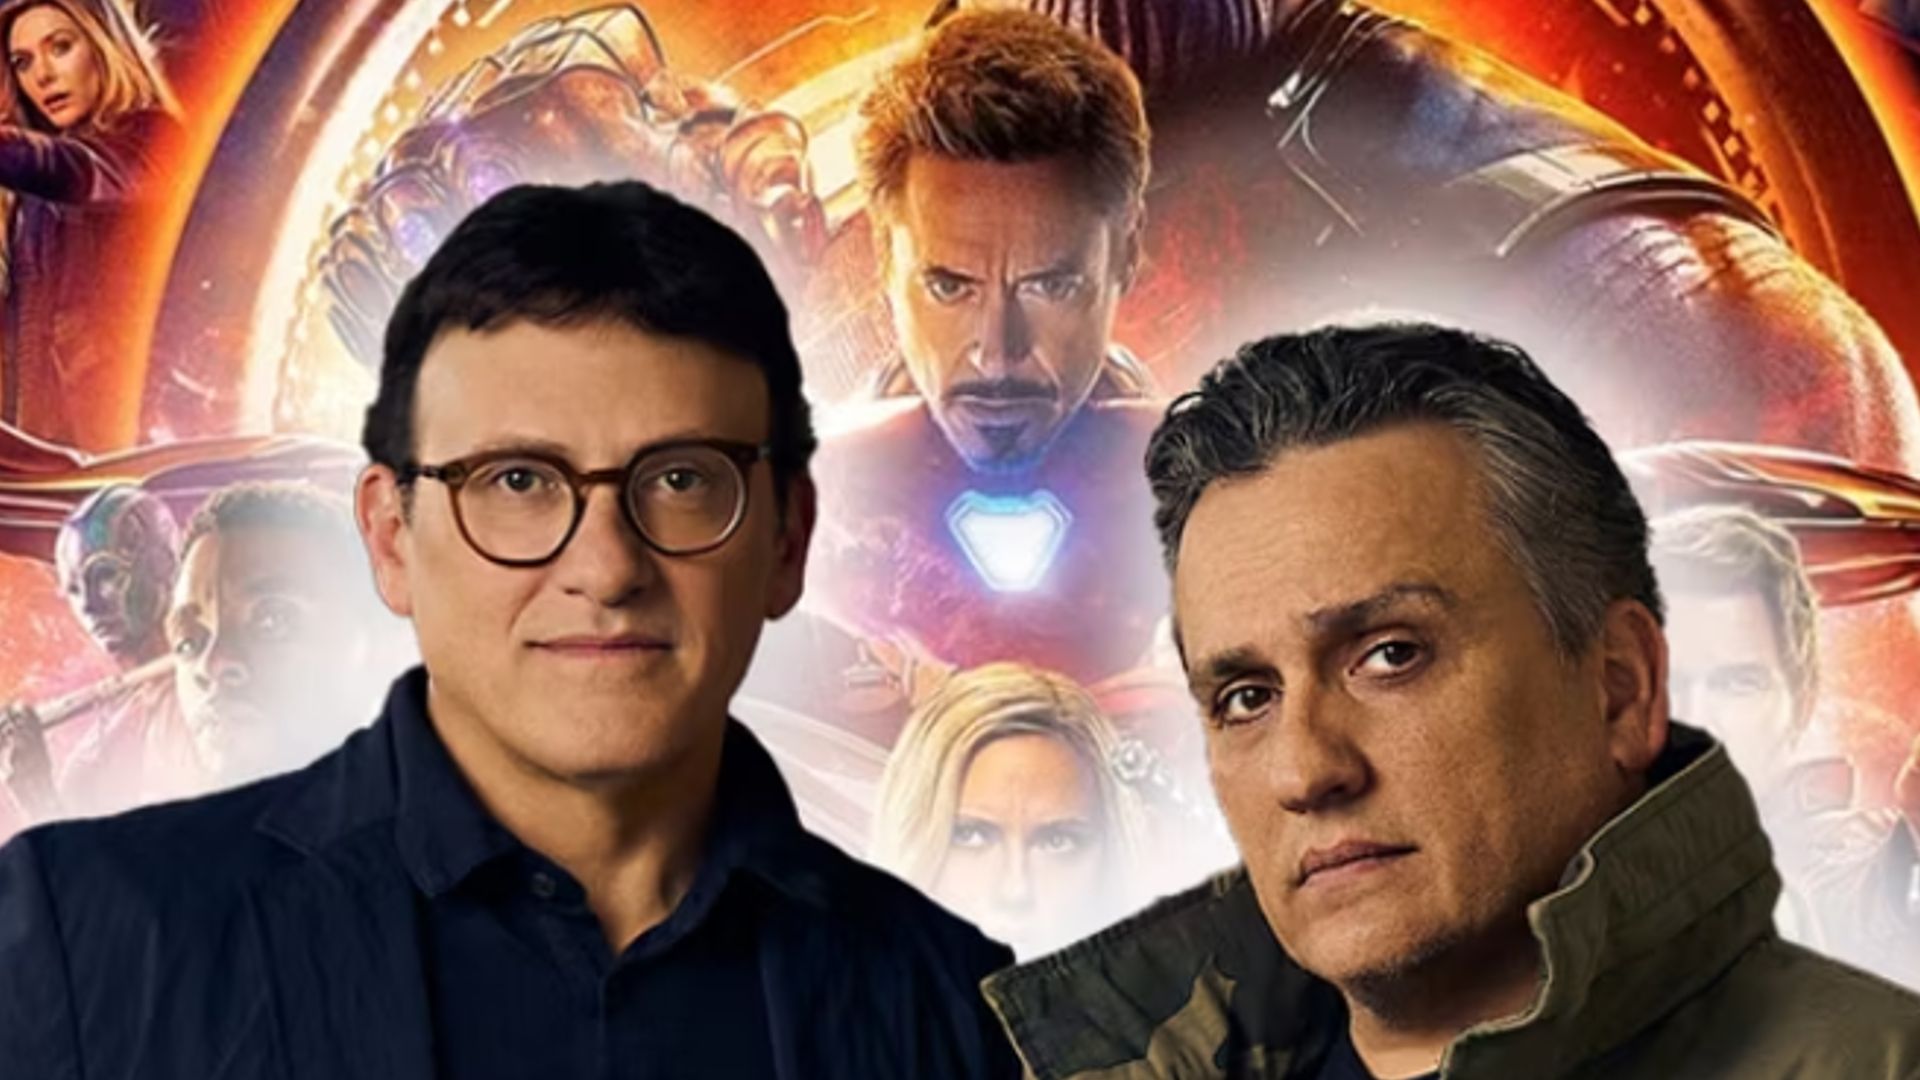 Anthony and Joe Russo Are Perplexed by How Robert Downey Jr. Would Return to the MCU: ‘We Closed That Book’